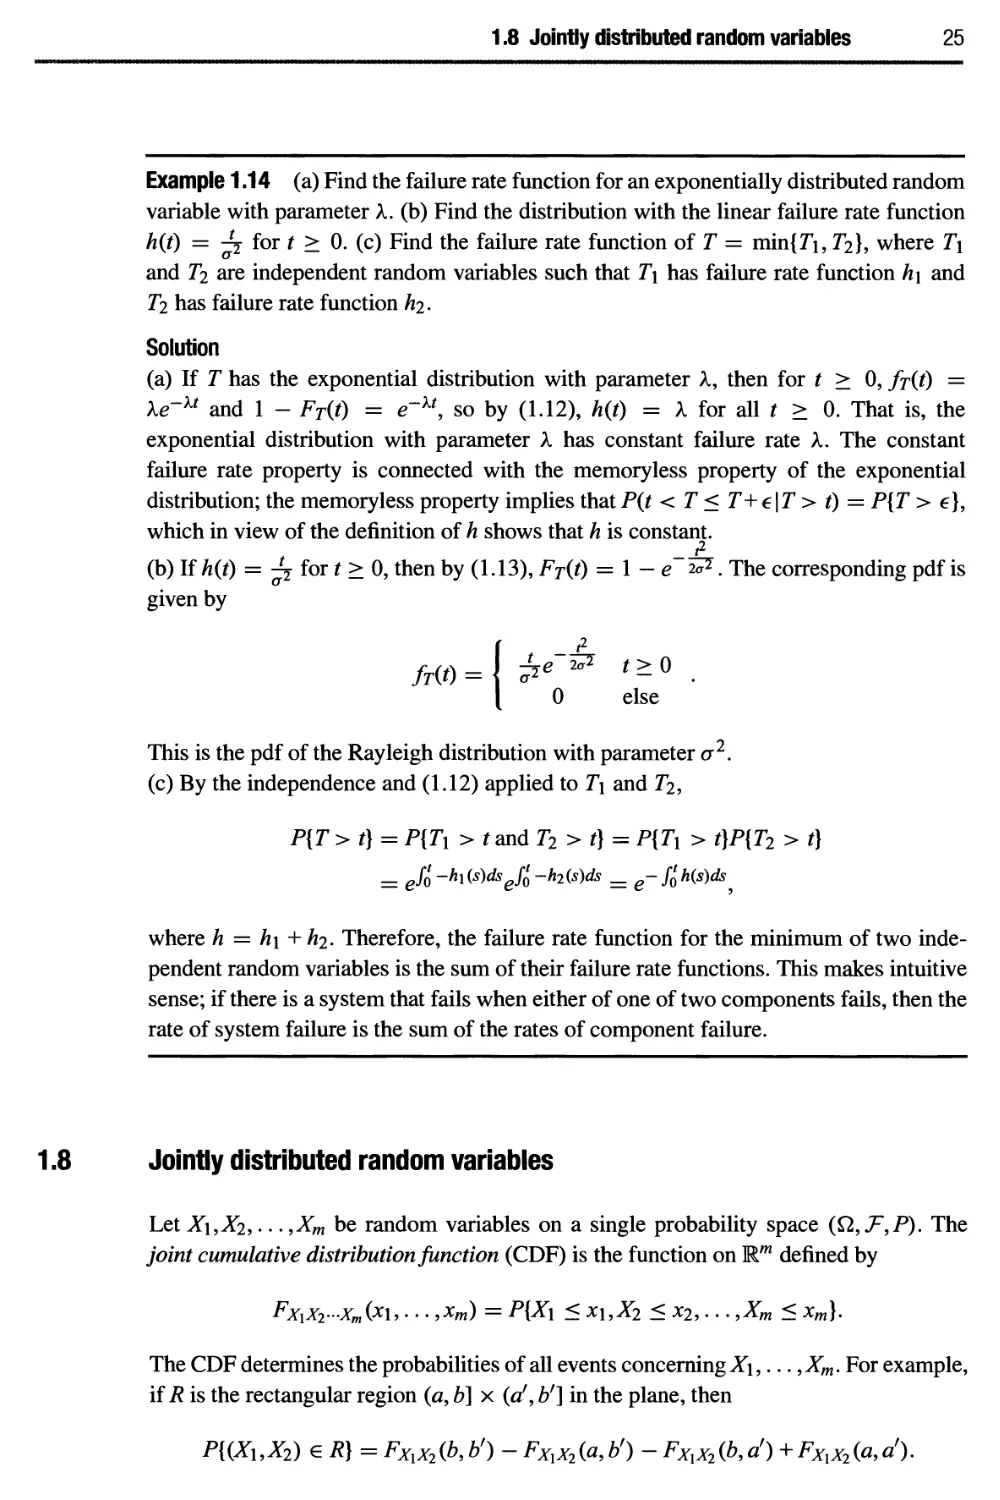 1.8 Jointly distributed random variables 25